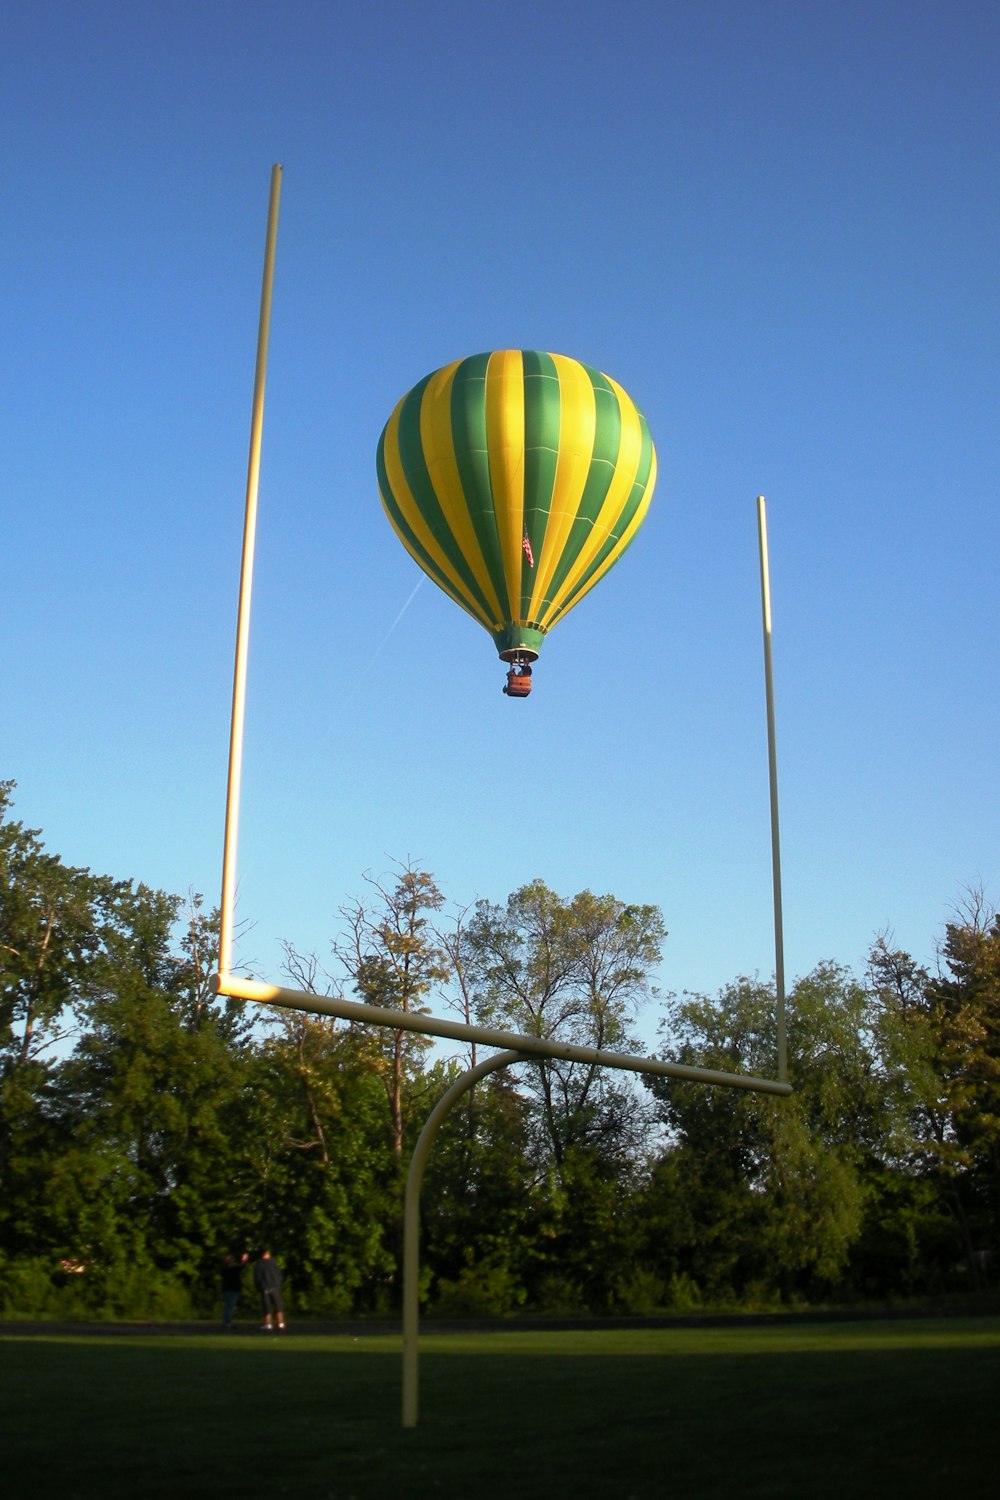 green yellow and blue hot air balloon on the air during daytime